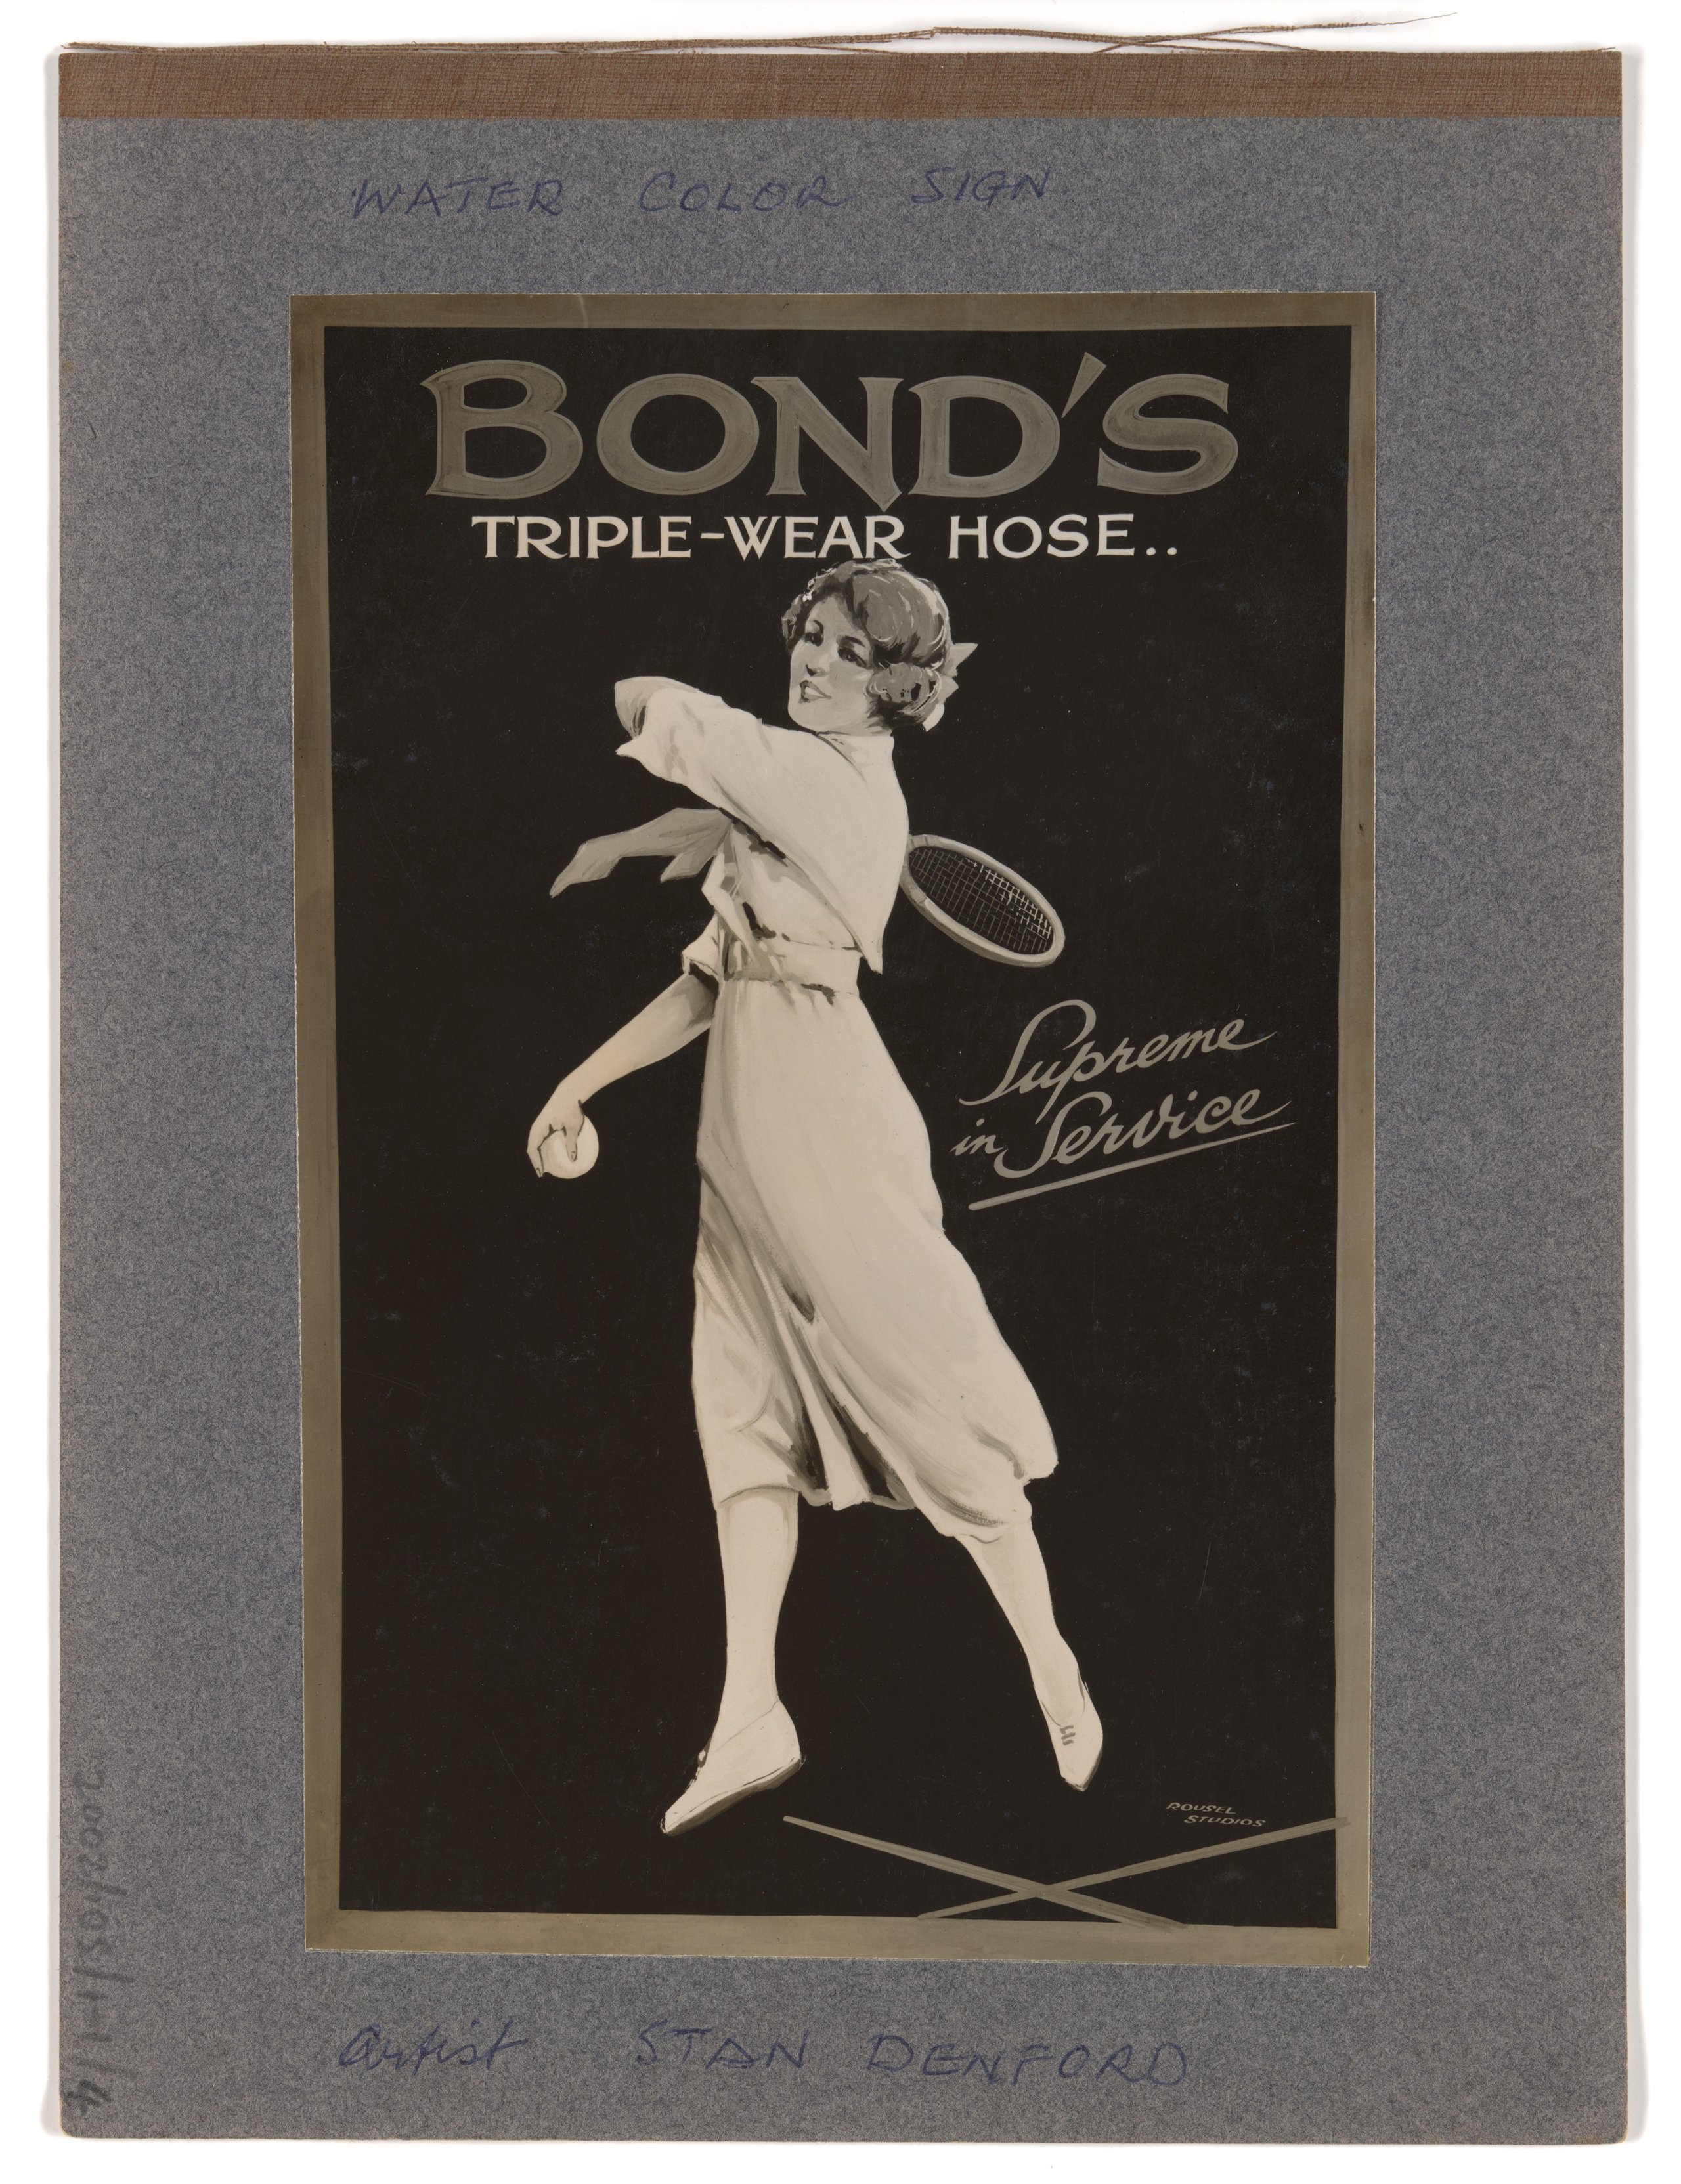 Photograph of advertising sign for Bond's Triple-Wear Hose